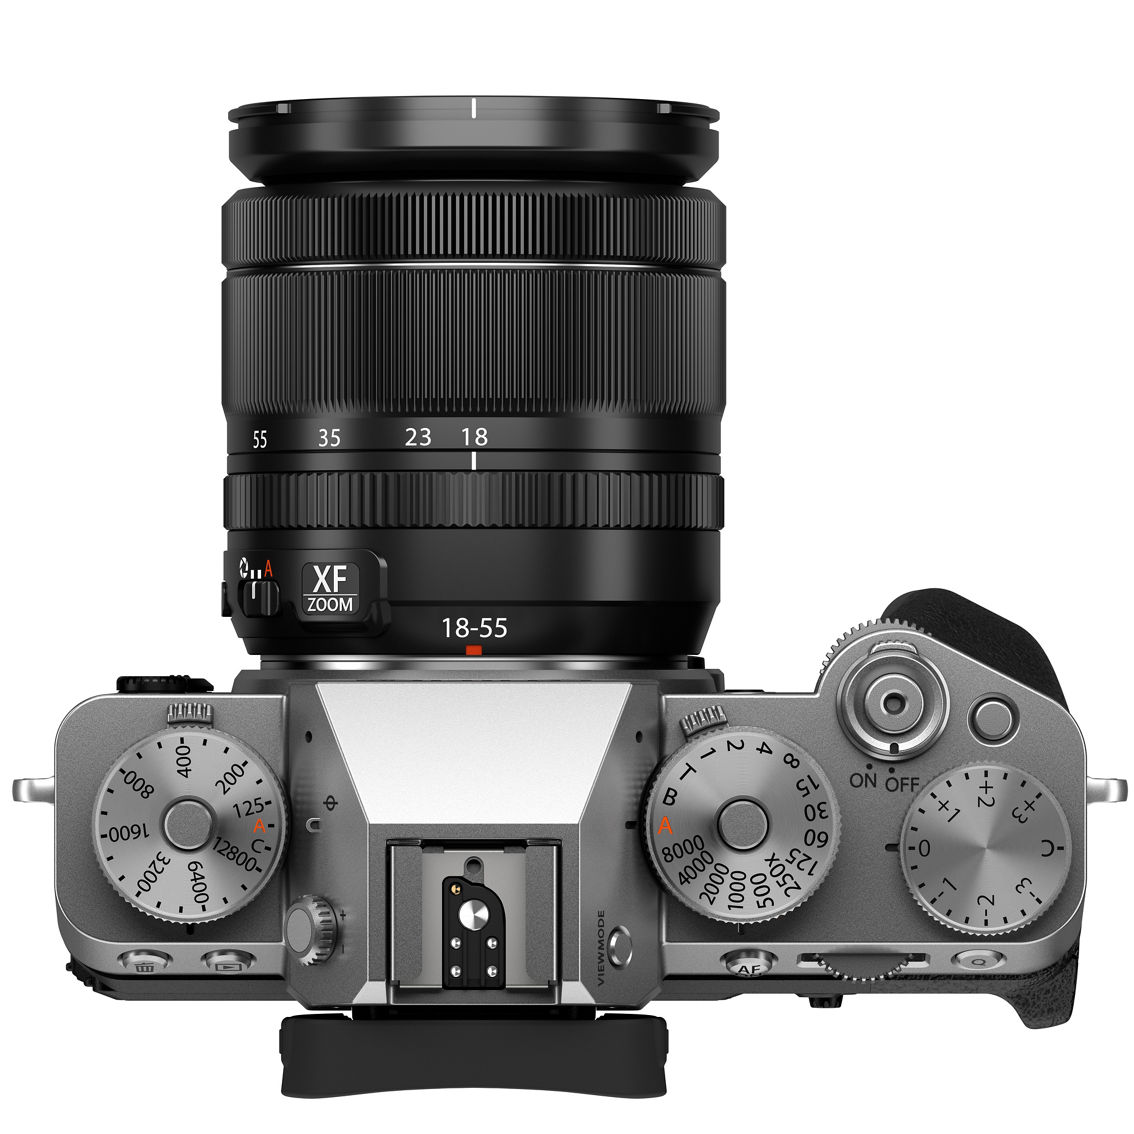 Fujifilm XT5 Mirrorless Camera Body and Silver XF 18 to 55mm F2.8-4 R LM OIS Lens - Image 7 of 7